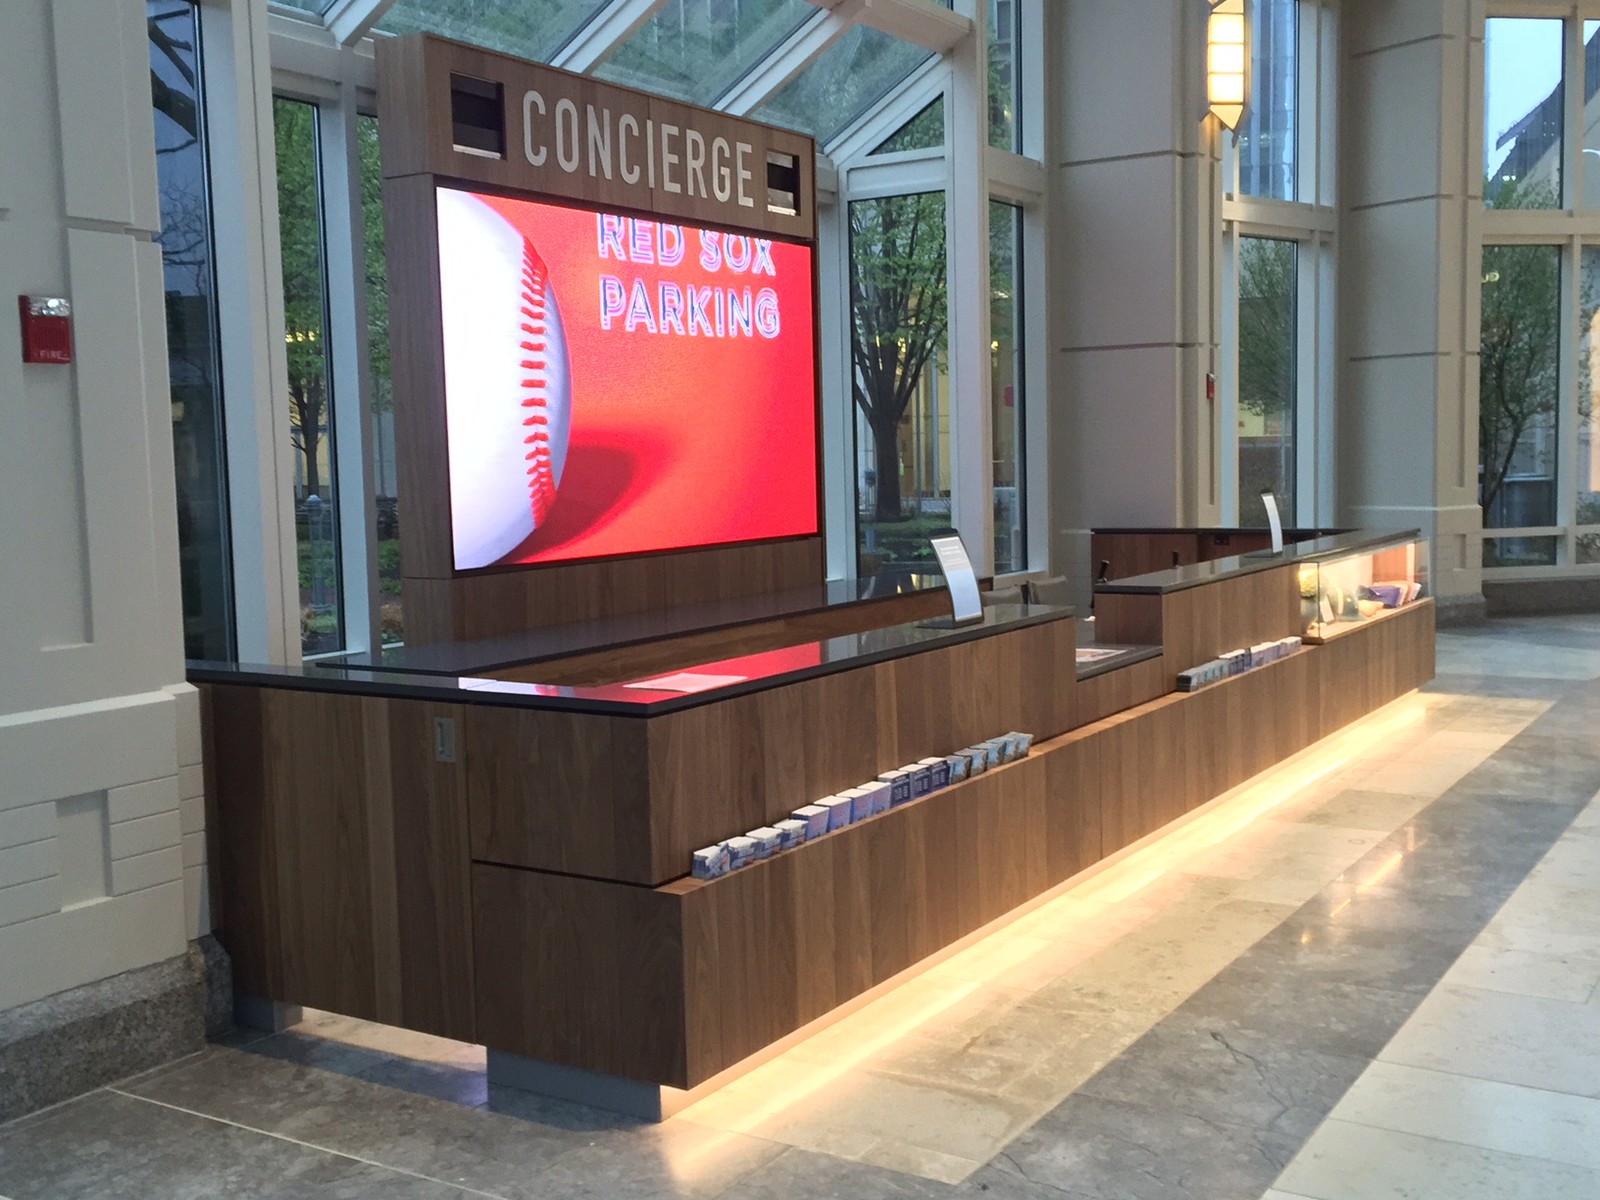 Reception area for the common areas at the Prudential Center, Boston